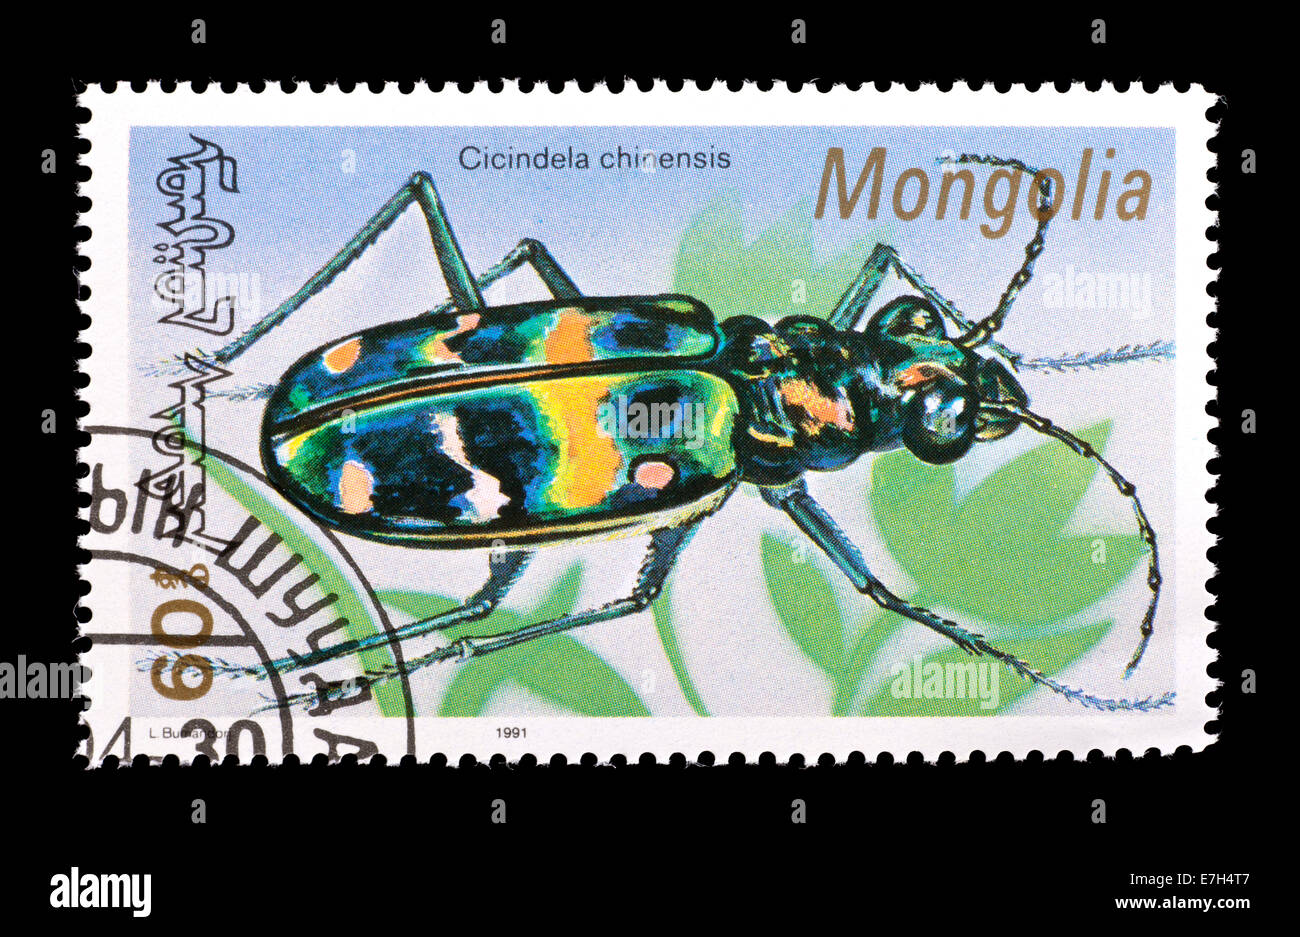 Postage stamp from Mongolia depicting a Chinese tiger beetle (Cincindela chinensis) Stock Photo